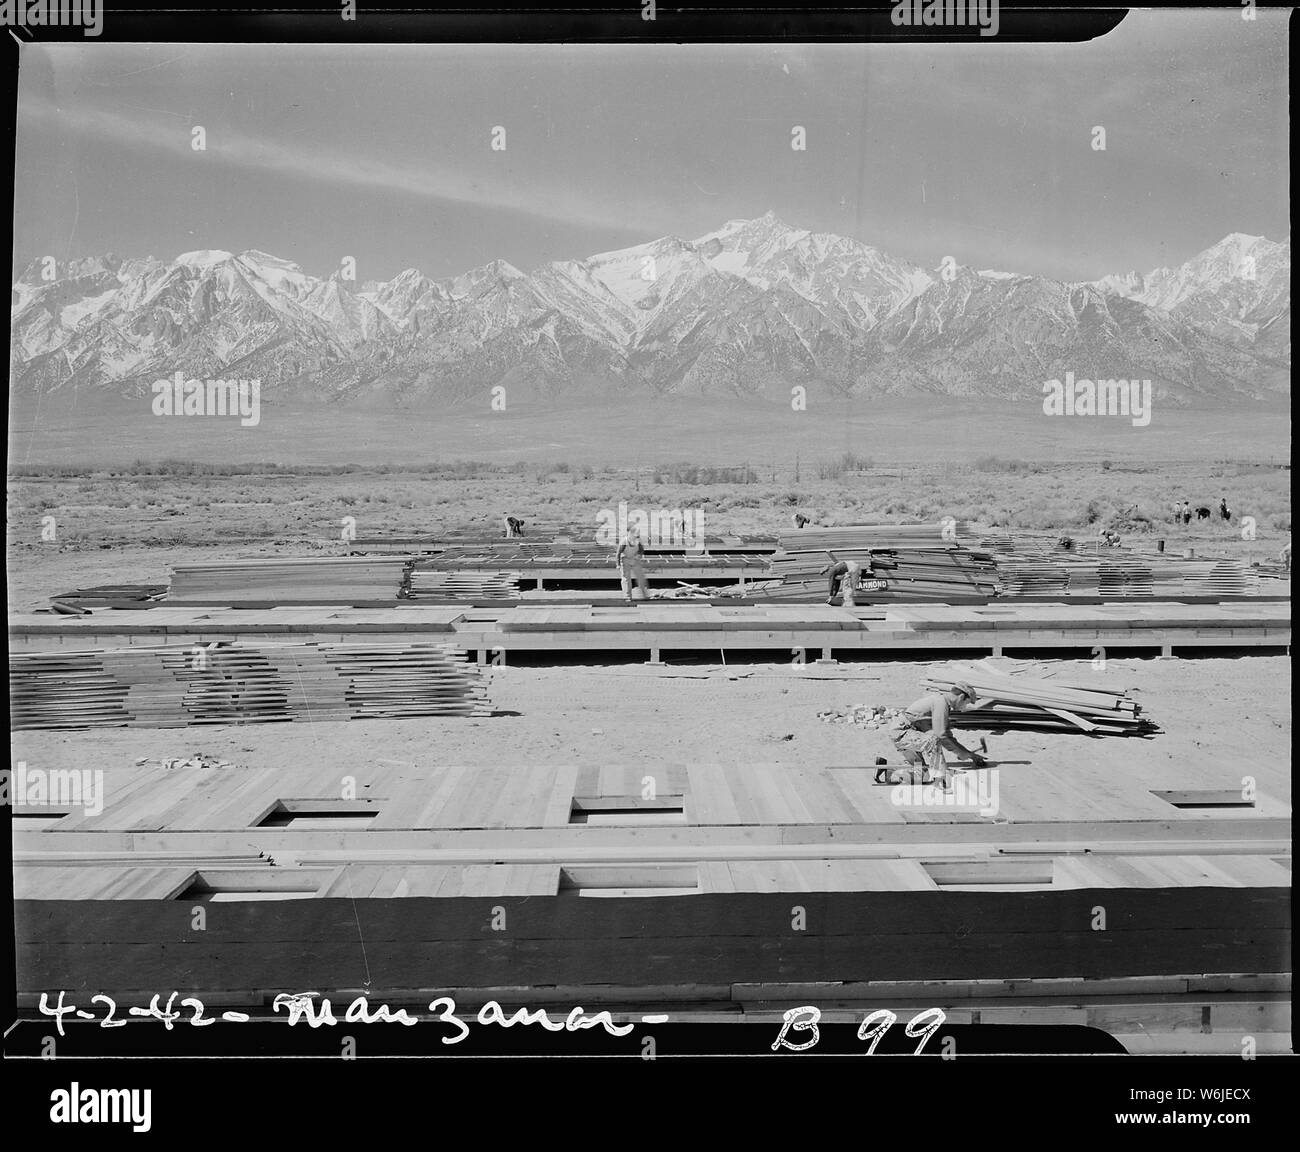 Manzanar Relocation Center, Manzanar, California. Construction begins at Manzanar, now a War Reloca . . .; Scope and content:  The full caption for this photograph reads: Manzanar Relocation Center, Manzanar, California. Construction begins at Manzanar, now a War Relocation Authority center for evacuees of Japanese ancestry, in Owens Valley, flanked by the High Sierras and Mount Whitney, loftiest peak in the United States. Stock Photo